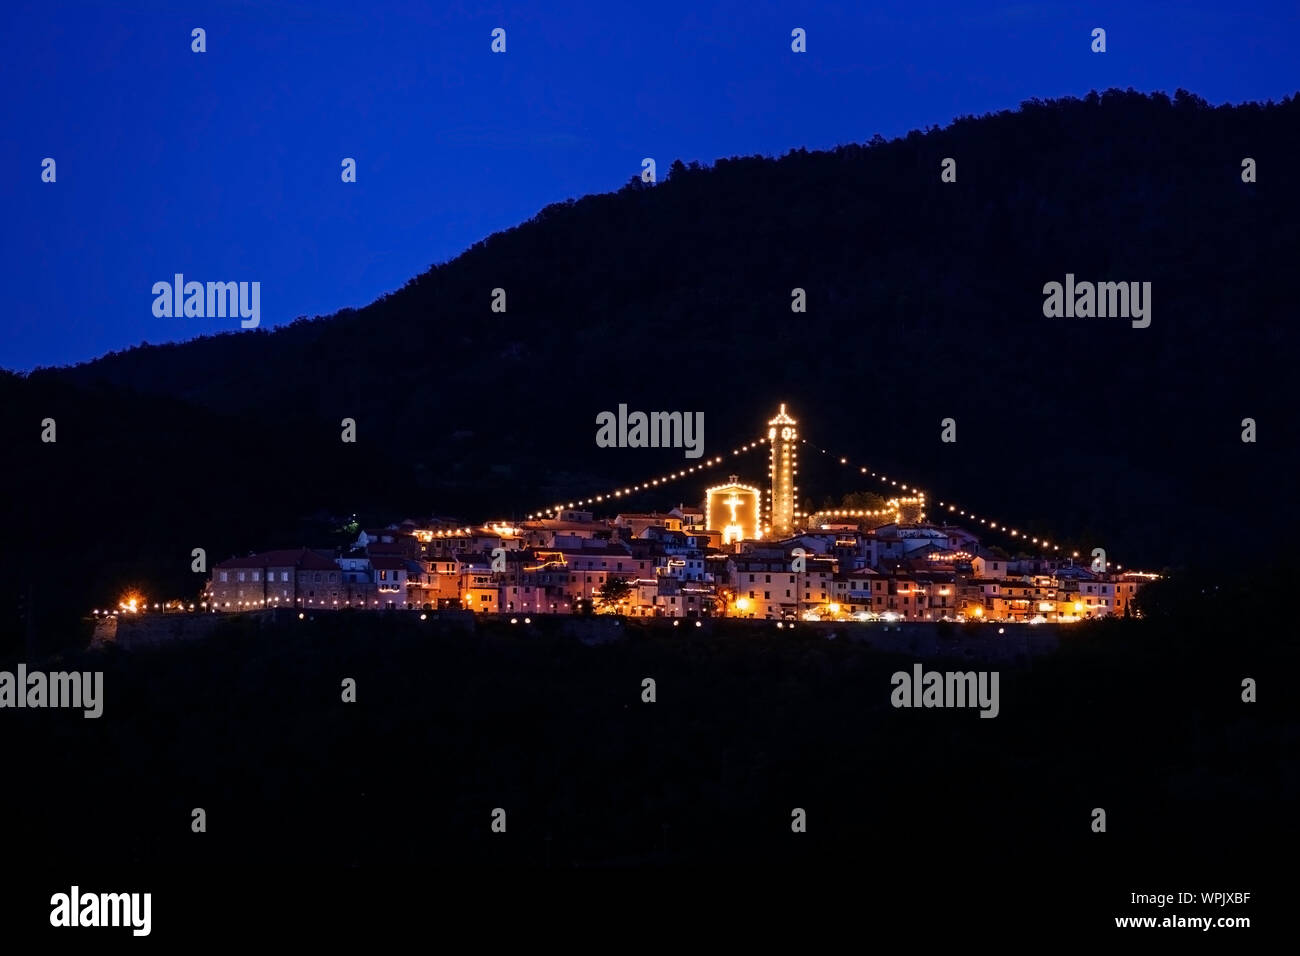 CAPRIGLIOLA, Nr AULLA, ITALY - SEPTEMBER 7, 2019: The hilltop village transforms itself with lights each year for the festival of Our Lady of Good Stock Photo